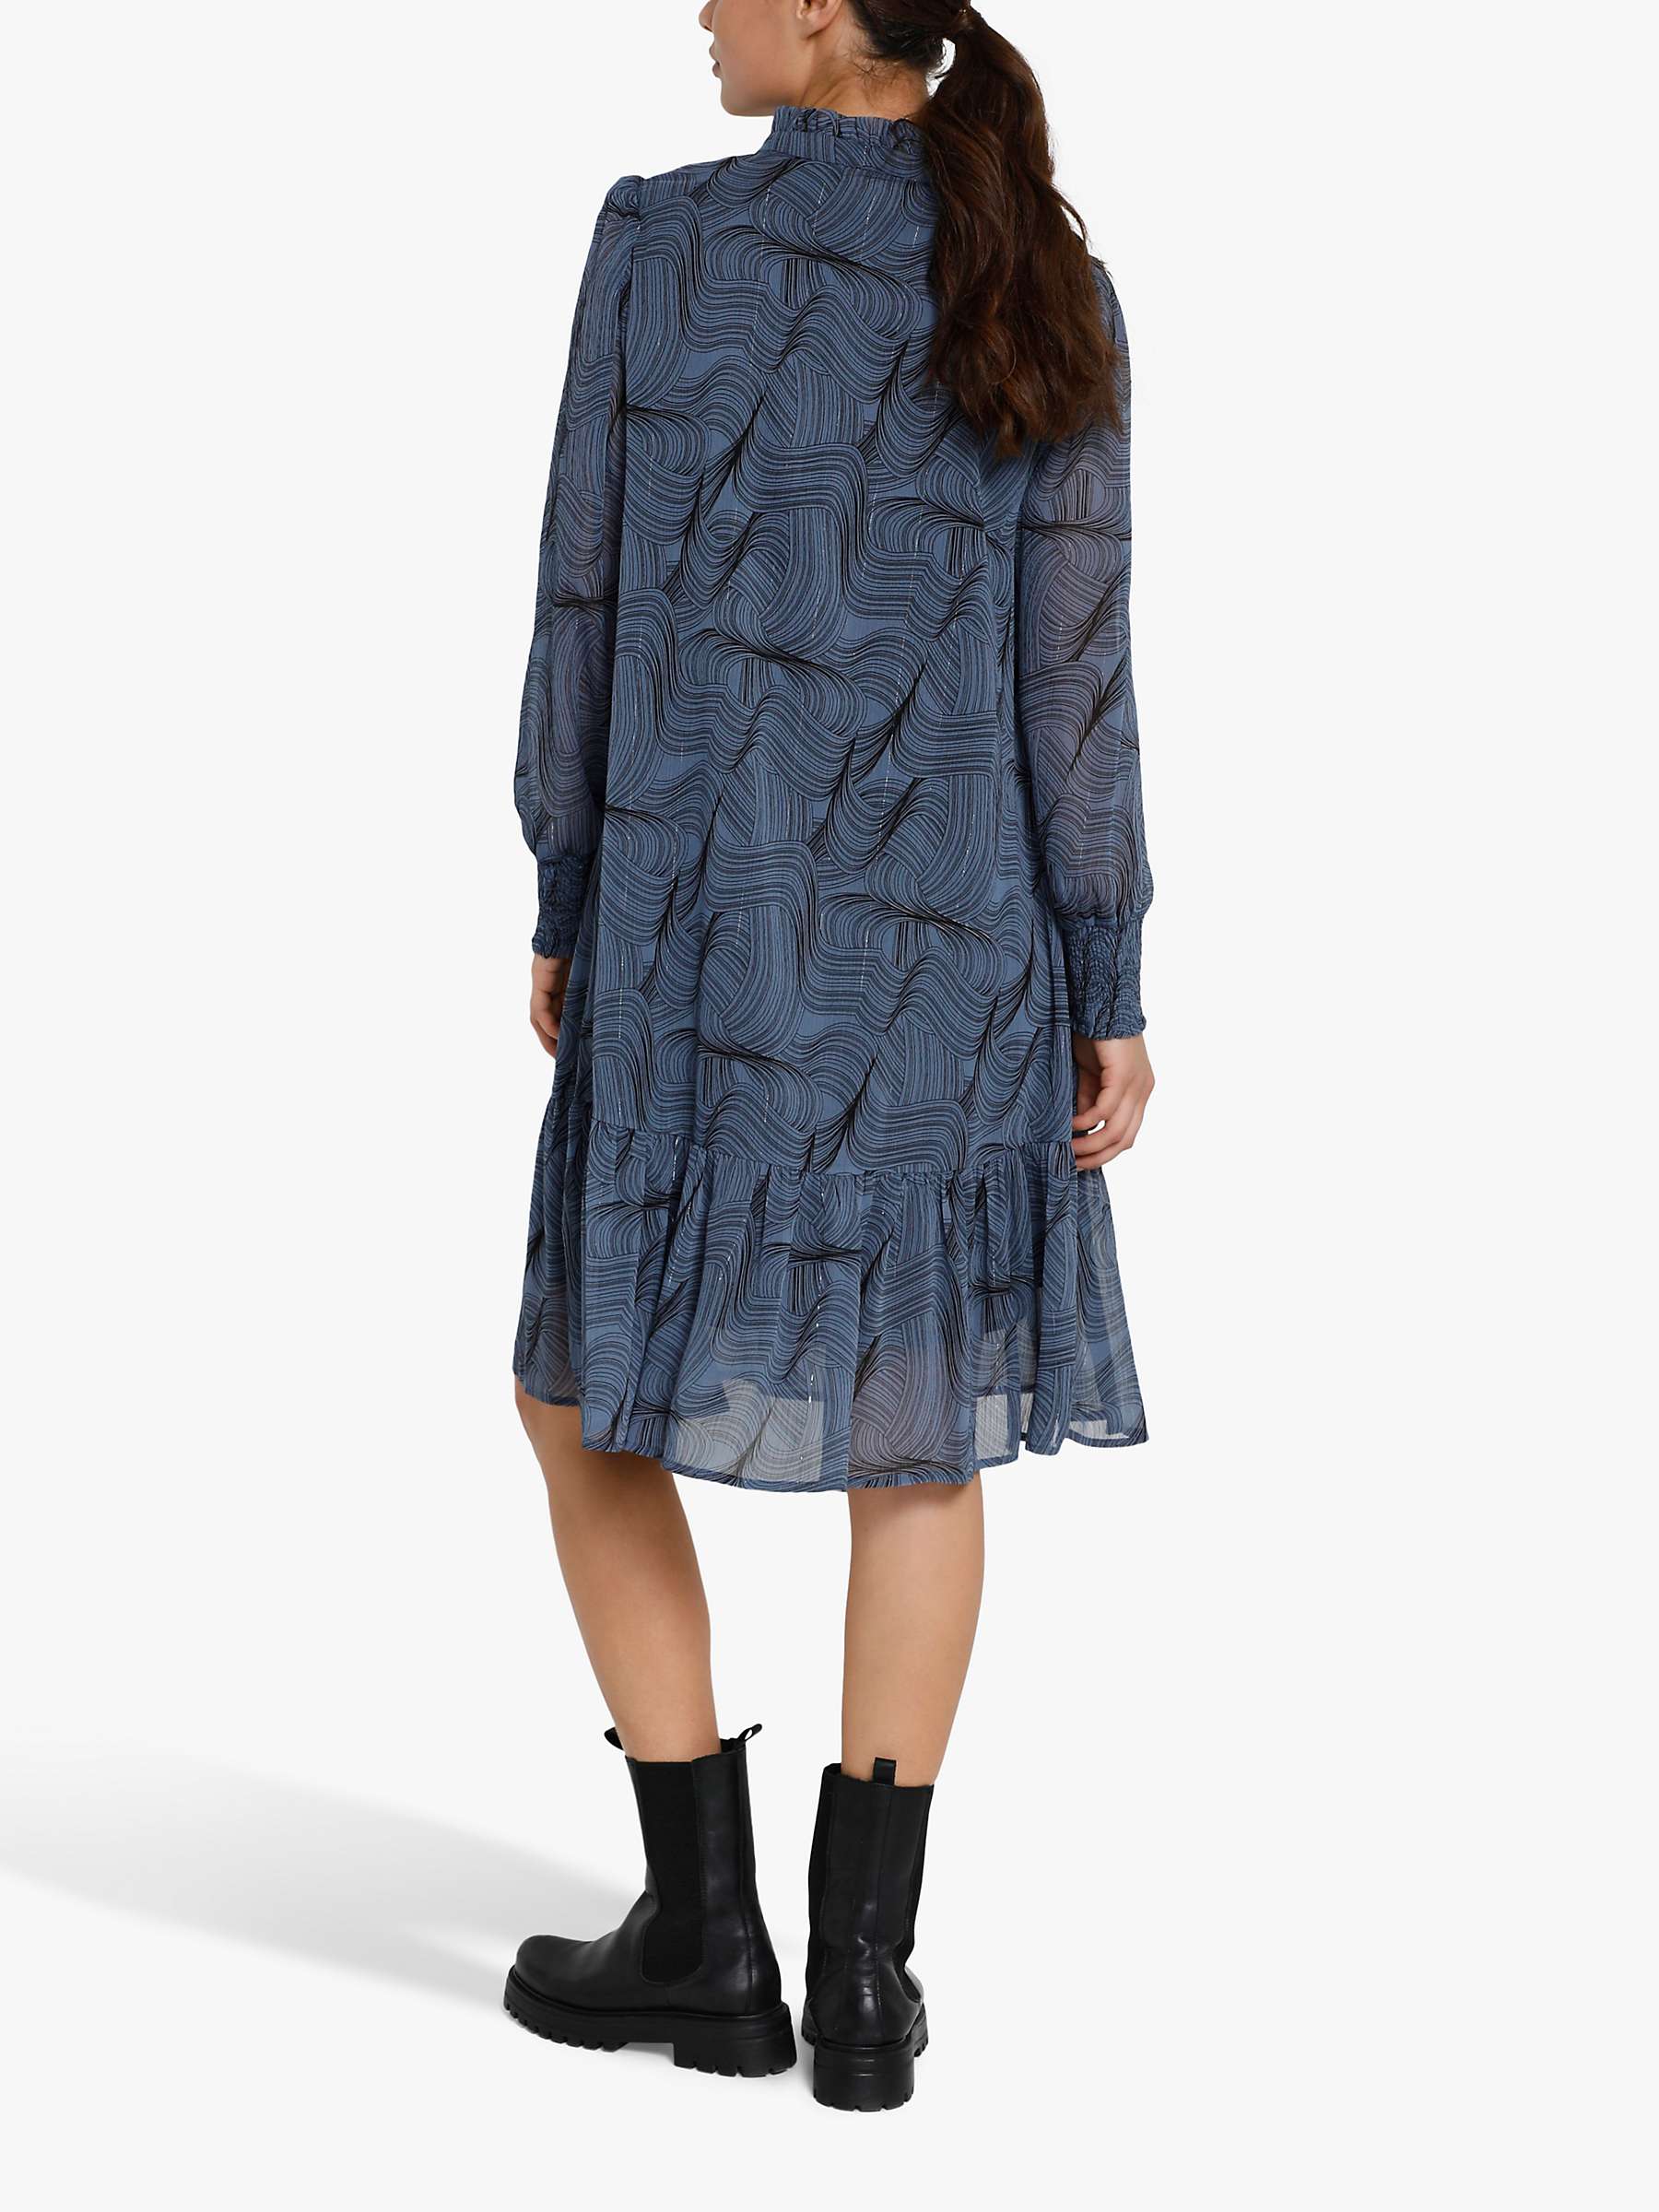 Buy KAFFE Jema Abstract Print Tiered Dress Online at johnlewis.com